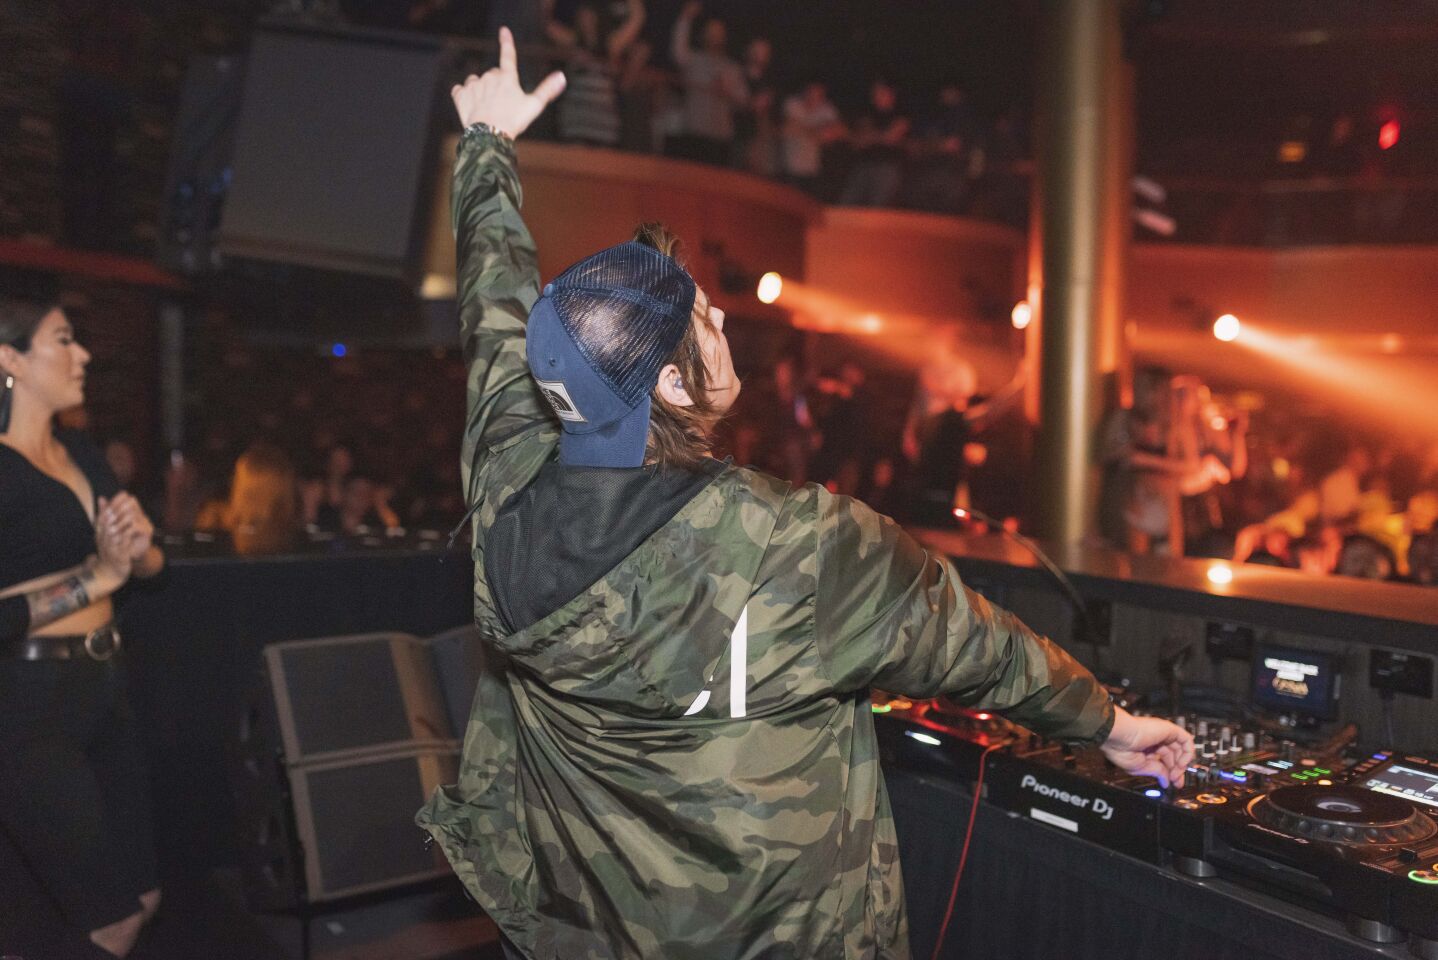 The crowd went wild when Audien hit the stage at OMNIA San Diego on Friday, May 3, 2019.